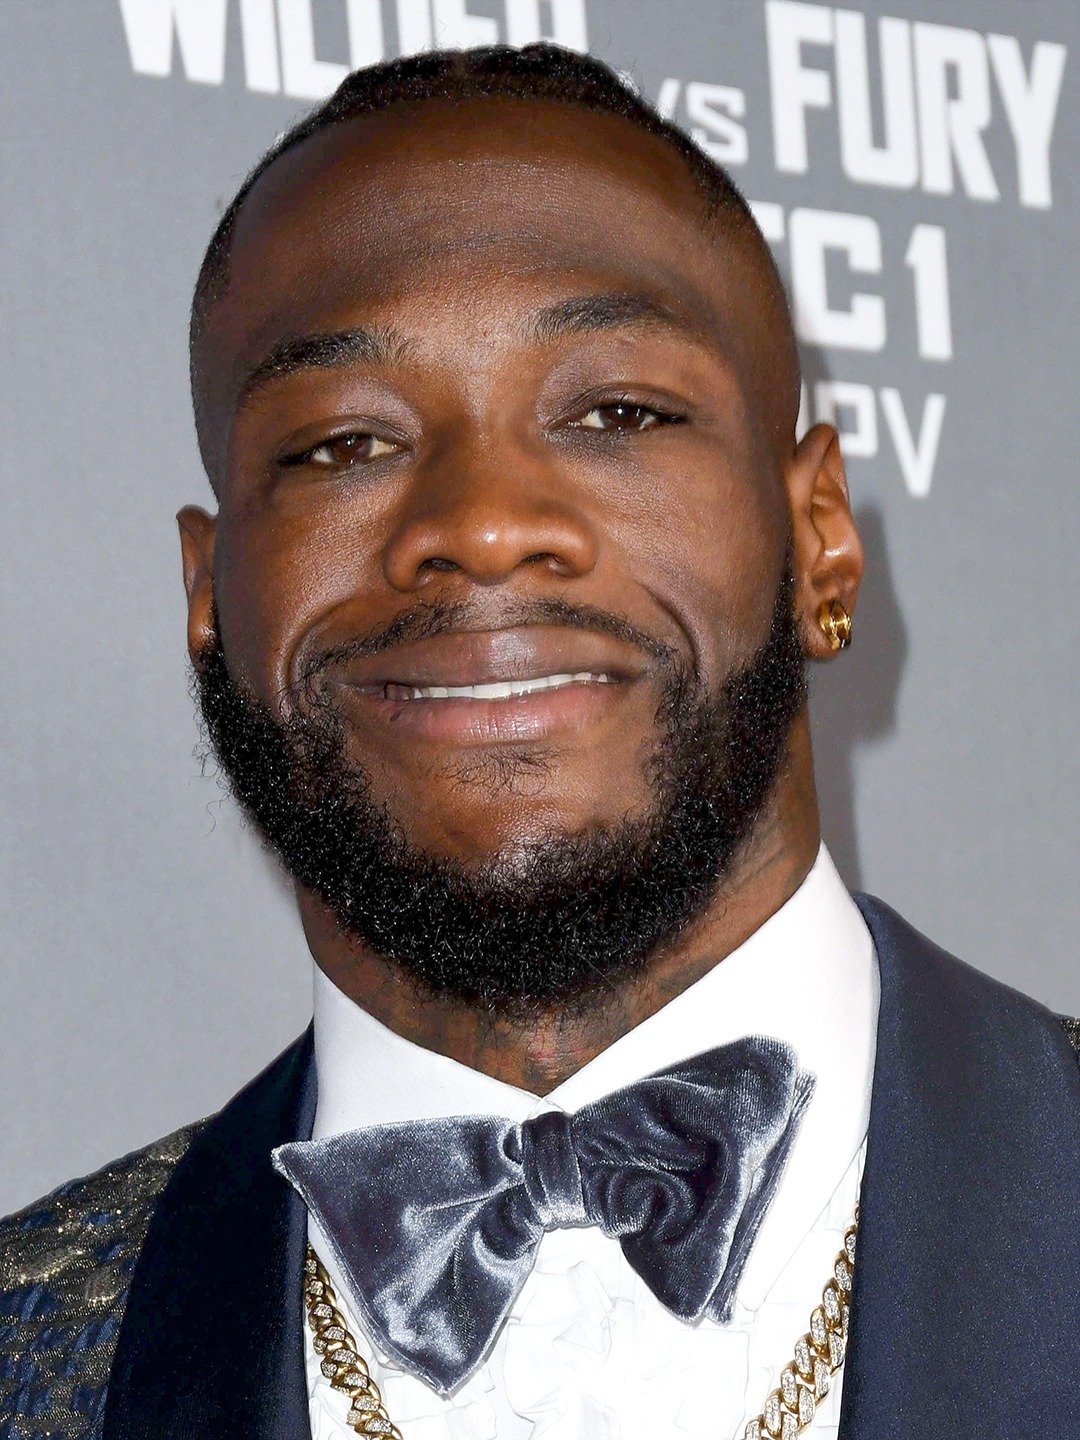 How tall is Deontay Wilder?